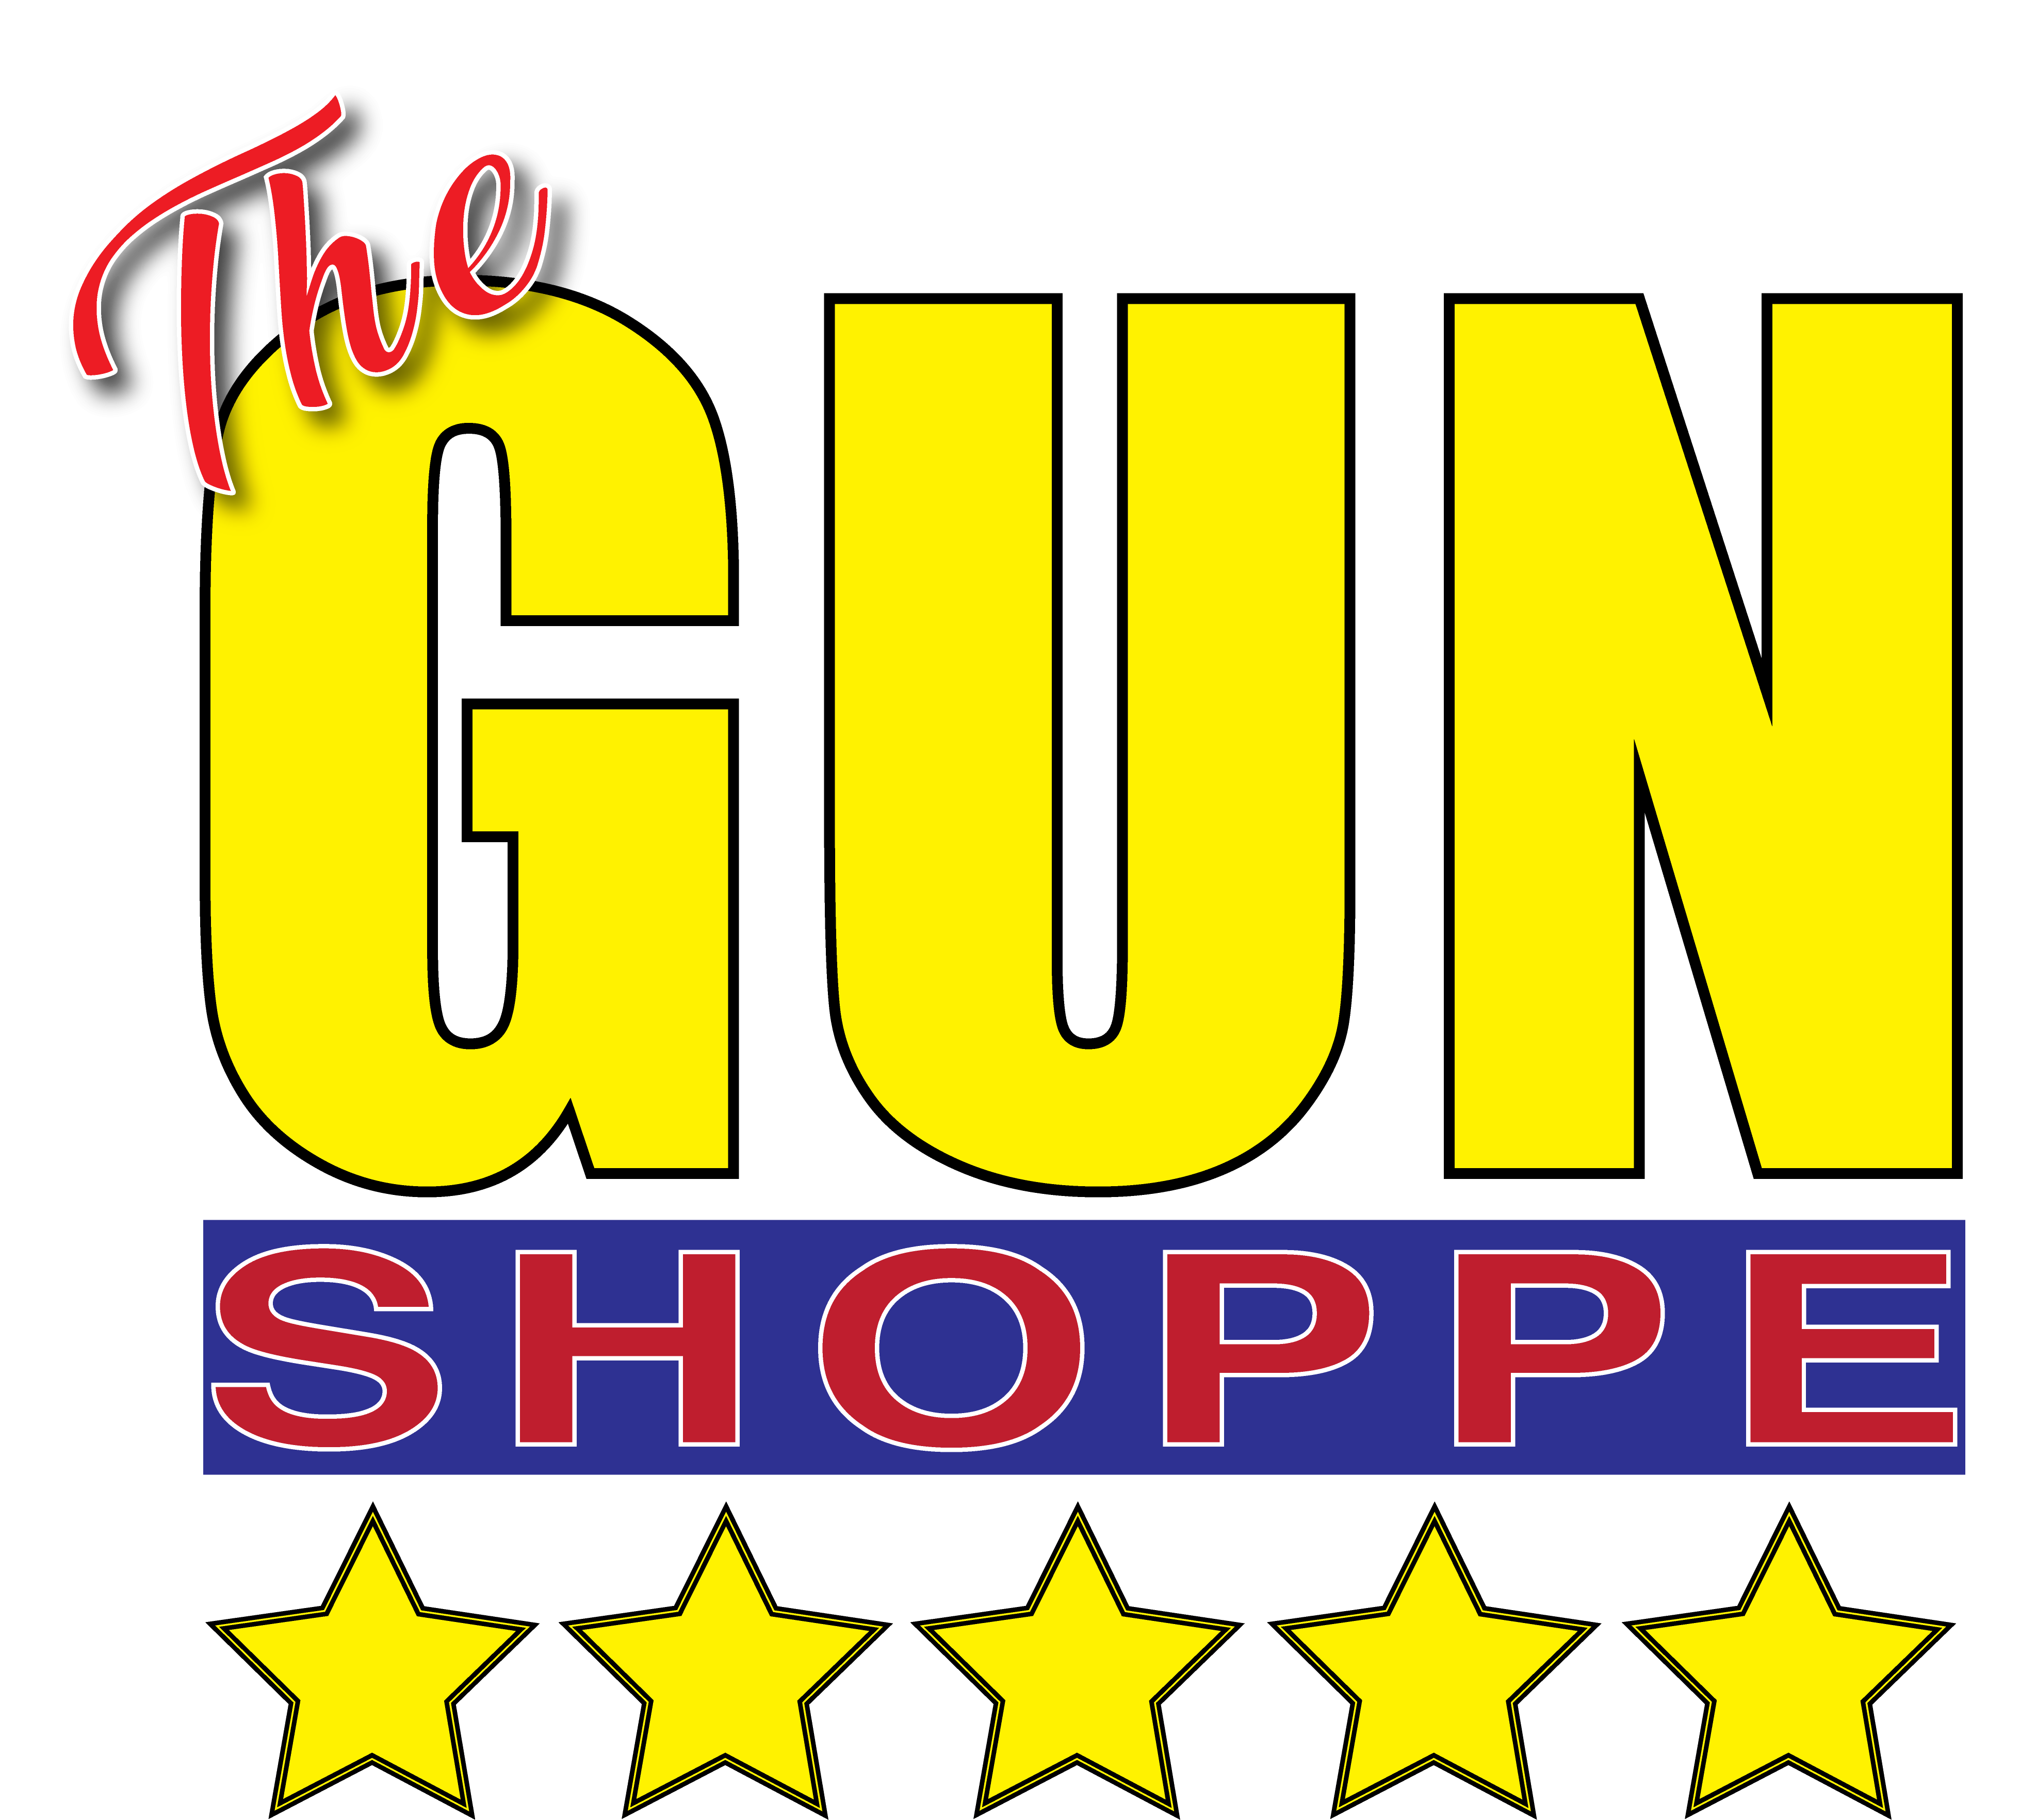 Firearms New & Used, Knives & Gun Safety Classes 